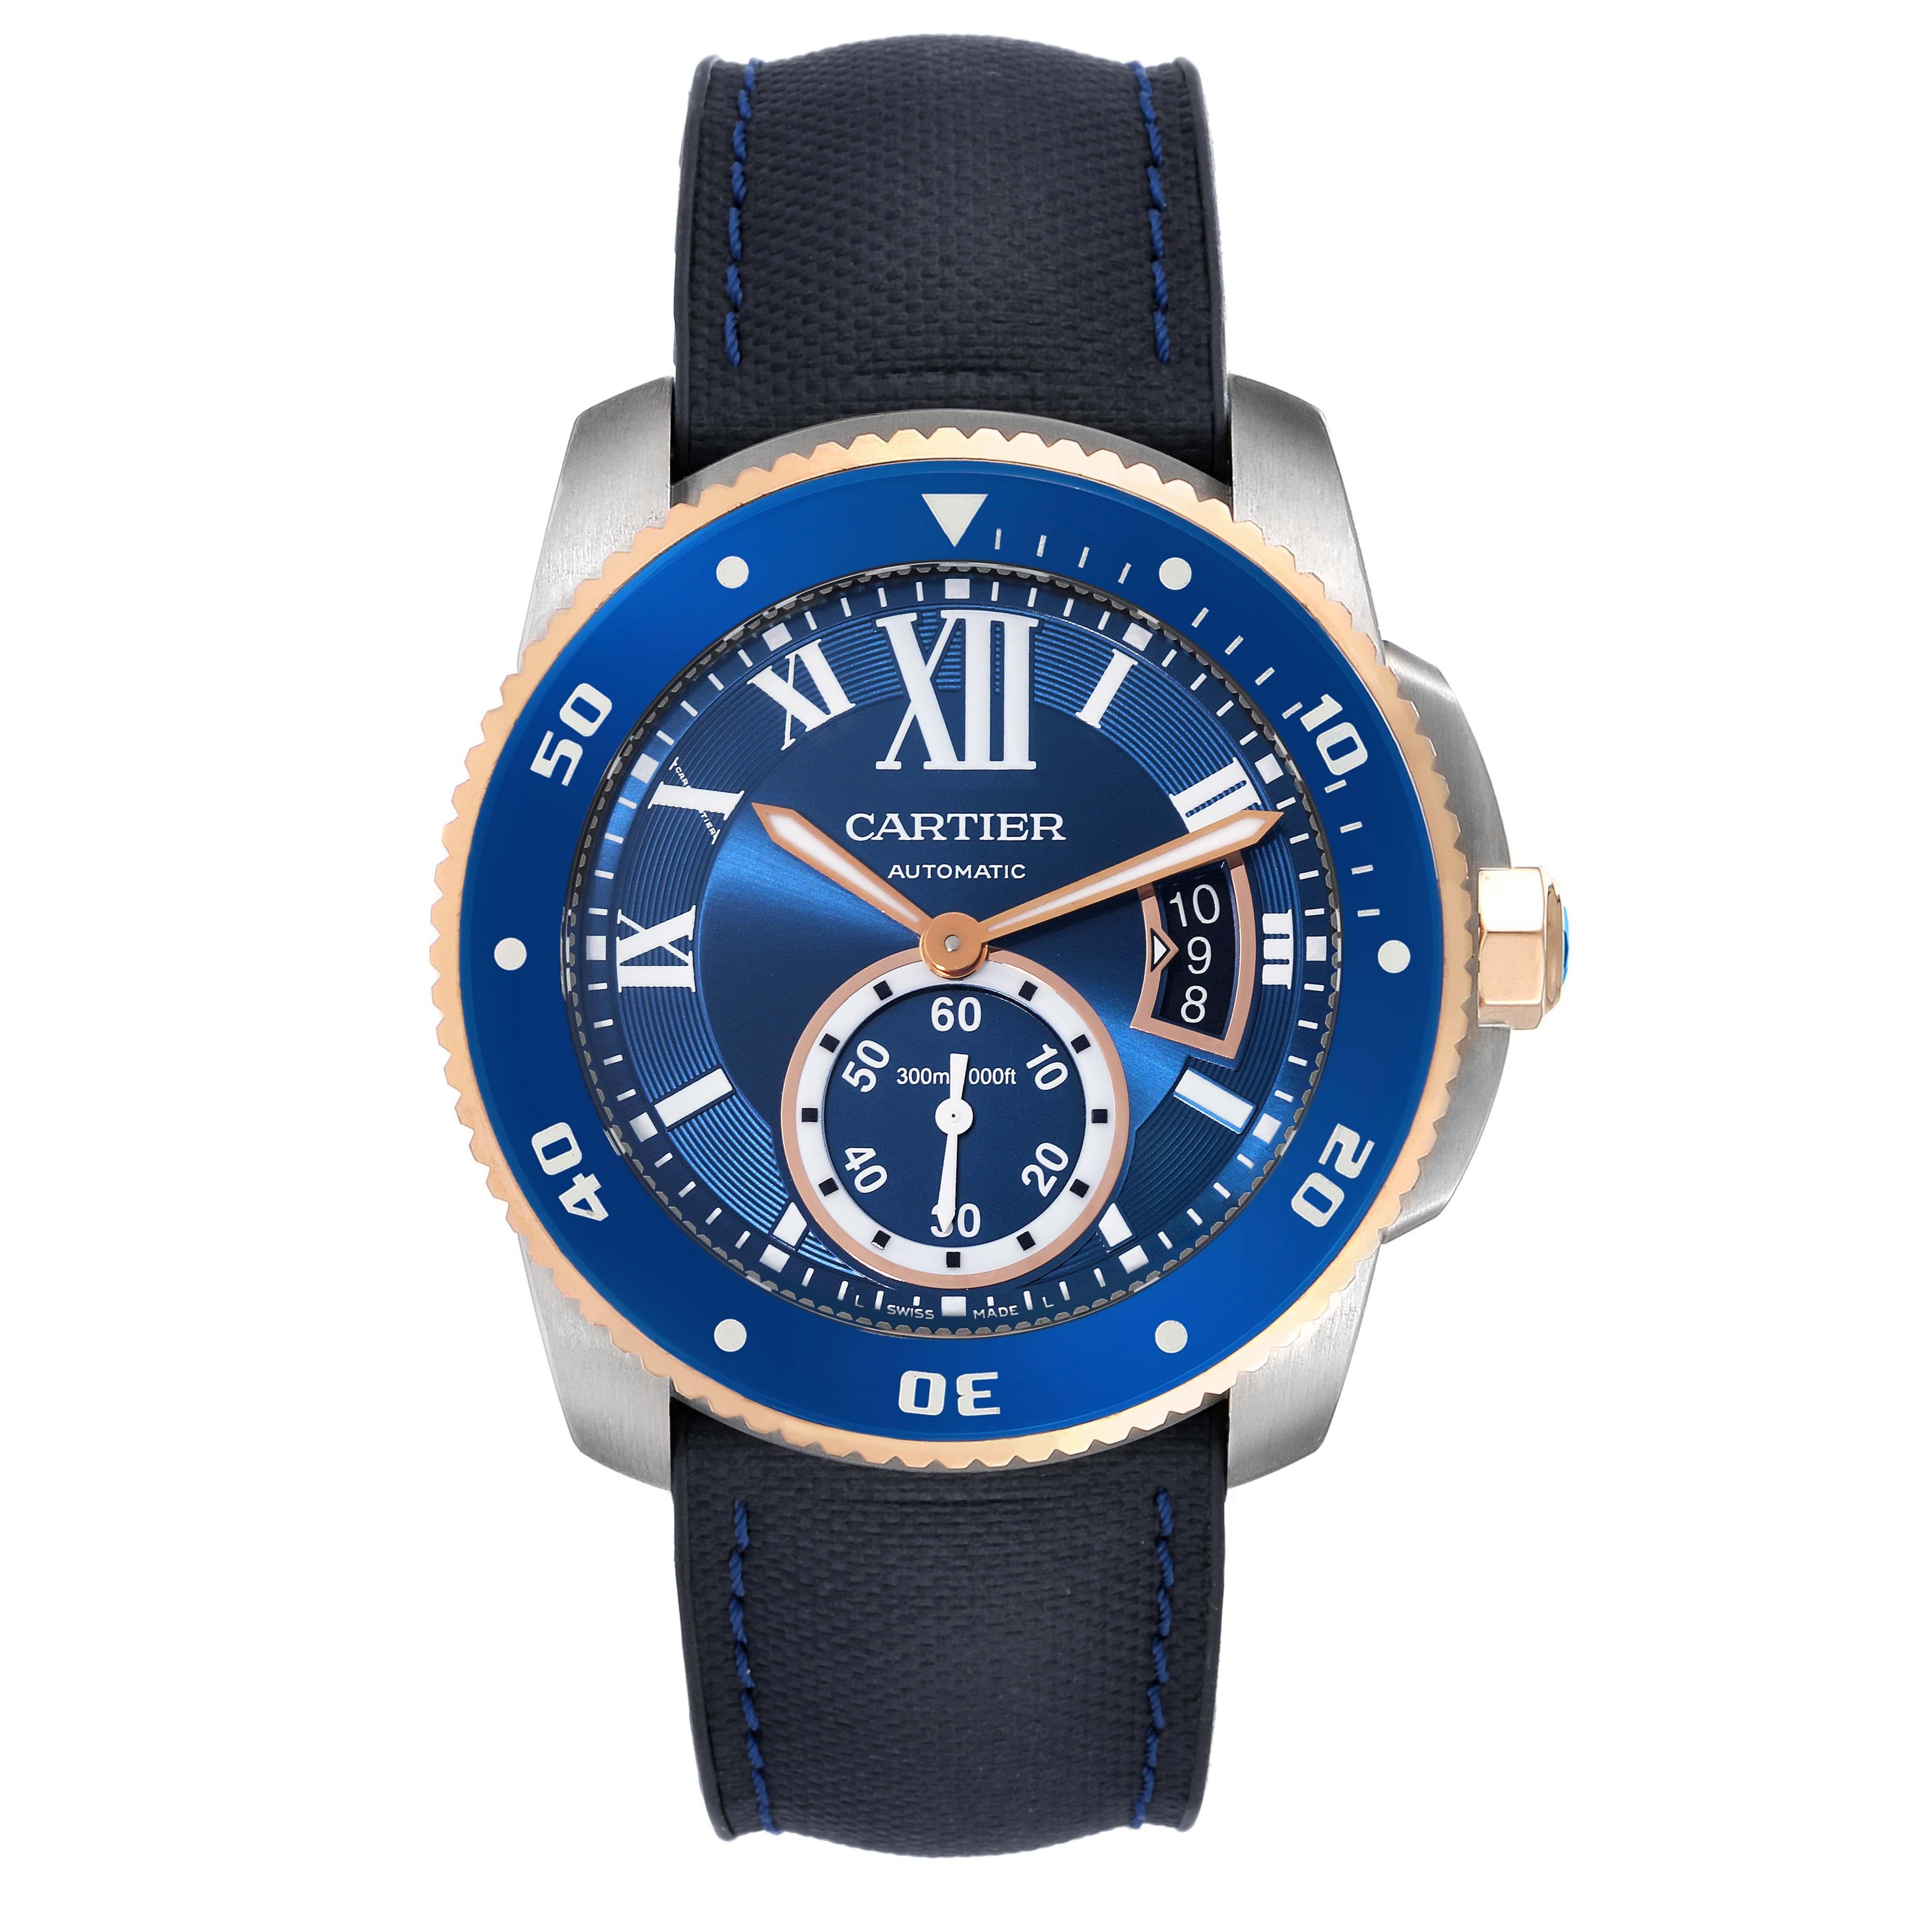 Cartier Calibre Diver Steel Rose Gold Blue Dial Mens Watch W2CA0008 Box Papers. Automatic self-winding movement. Stainless steel round case 42.0 mm in diameter. 18K rose gold crown set with faceted blue spinel. Case thickness: 11 mm. Blue ADLC